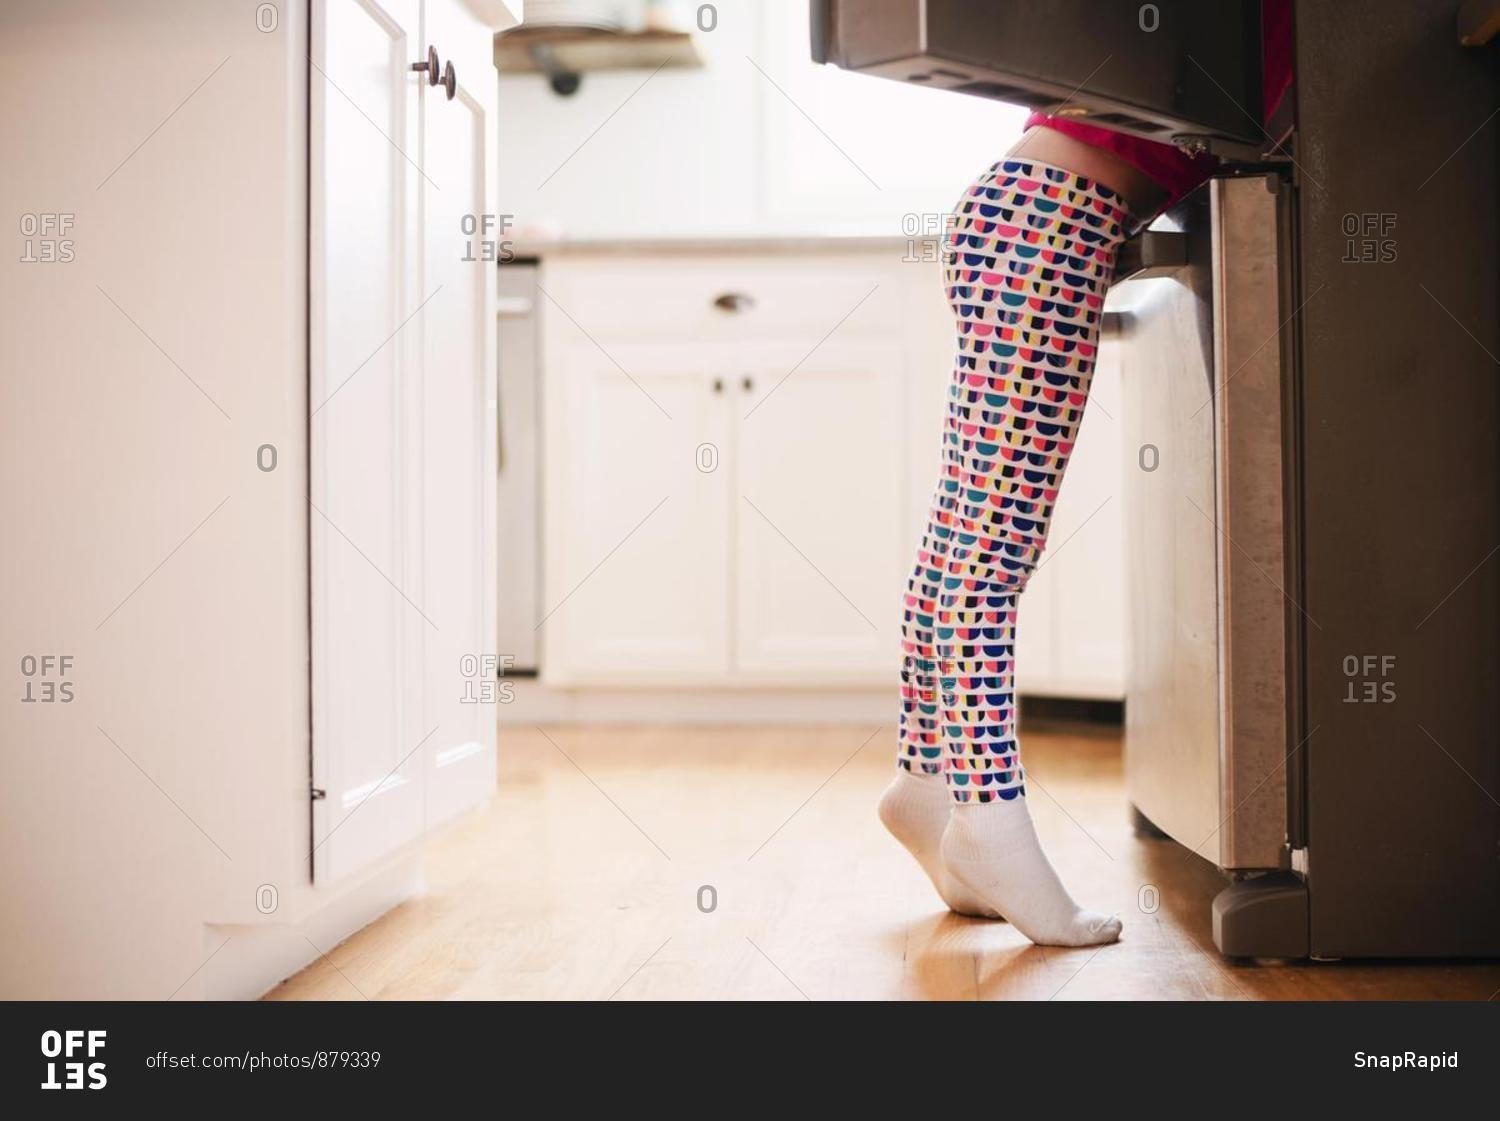 Girl looking for food in an open refrigerator in the kitchen